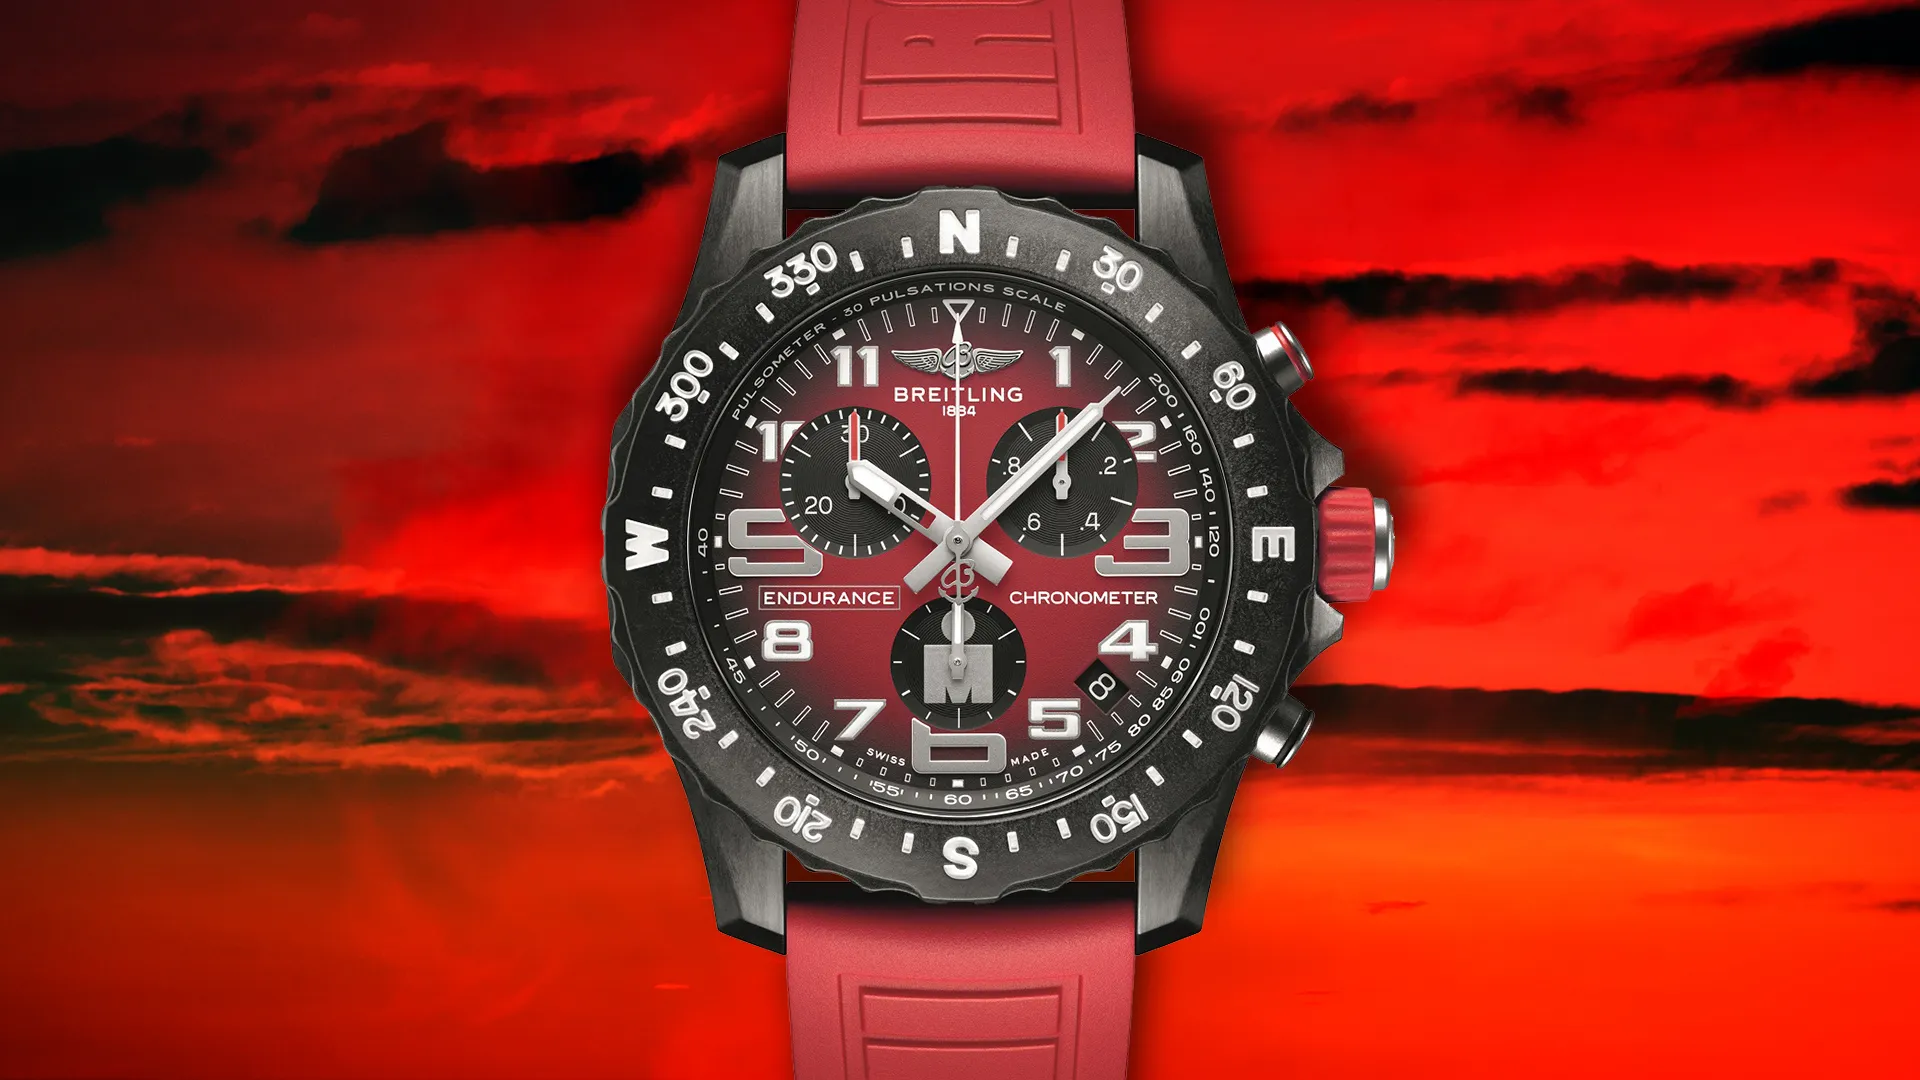 Breitling Endurance Pro IRONMAN - The Ultimate Timepiece for Endurance Athletes